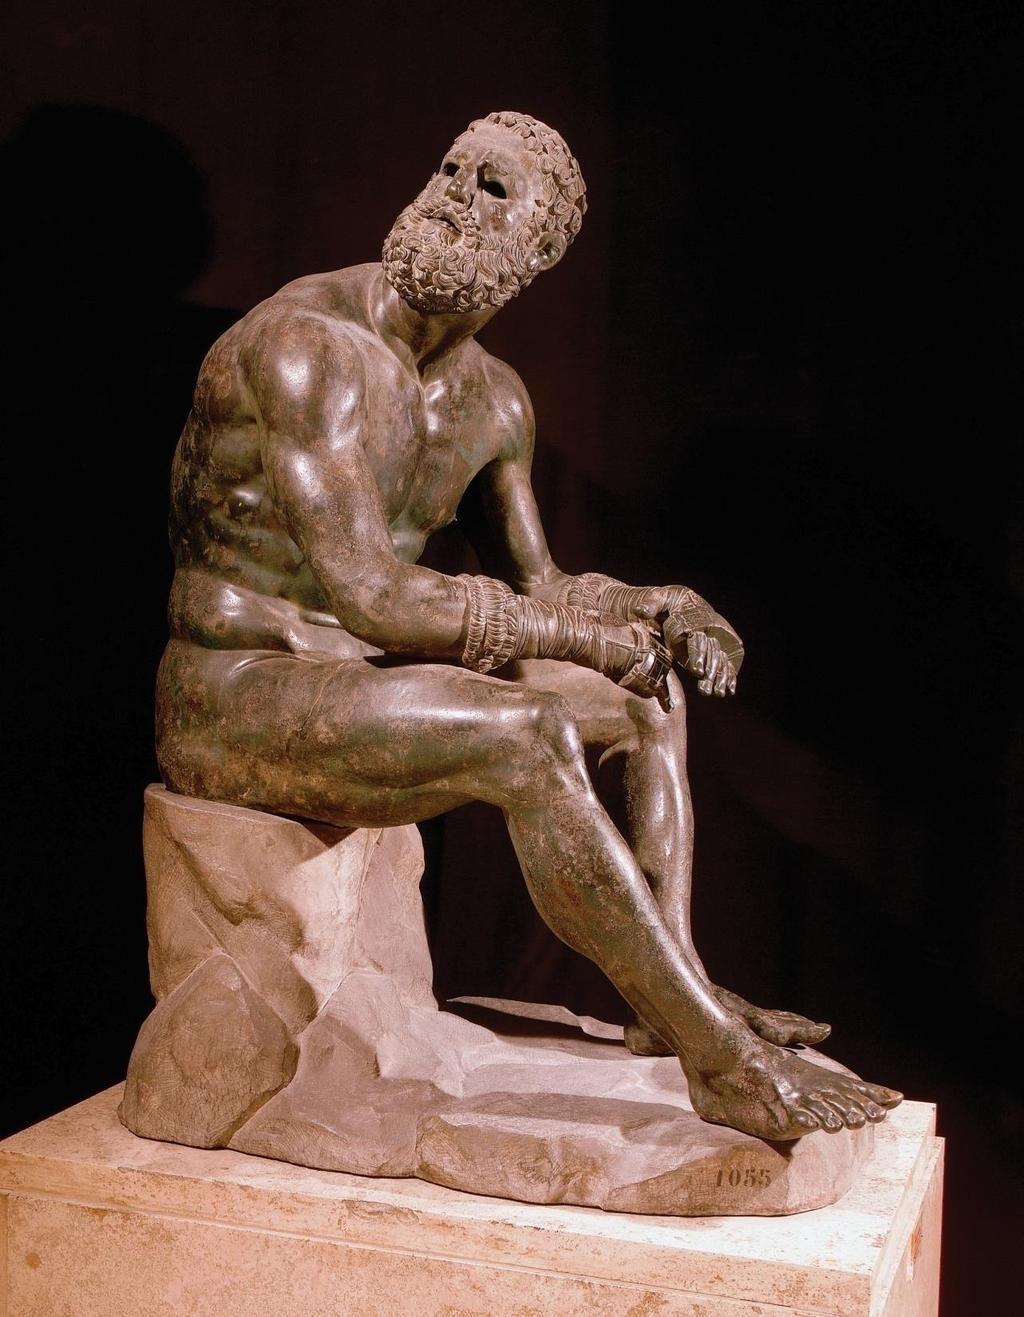 #41 Seated boxer. Hellenistic Greek. c. 100 BCE.